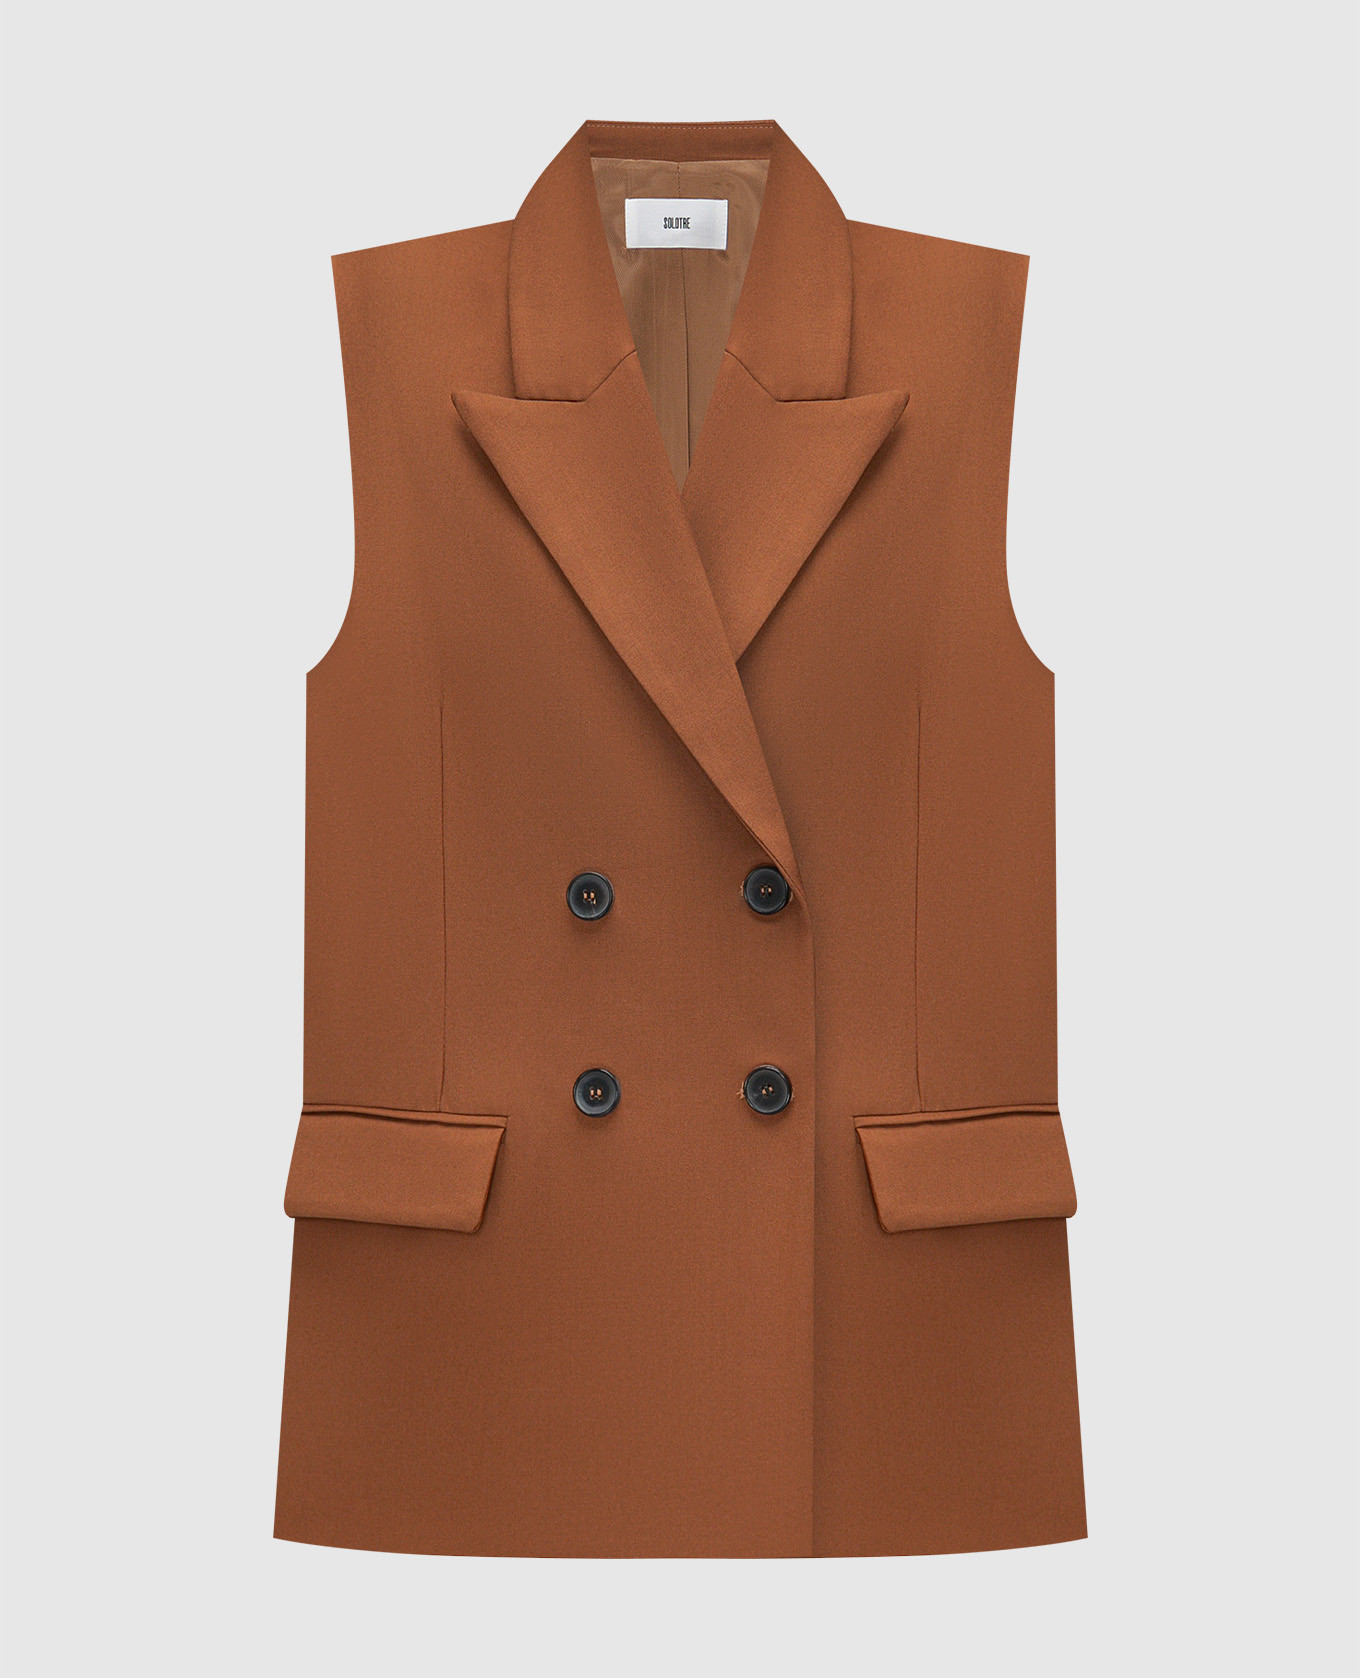 Brown double-breasted waistcoat